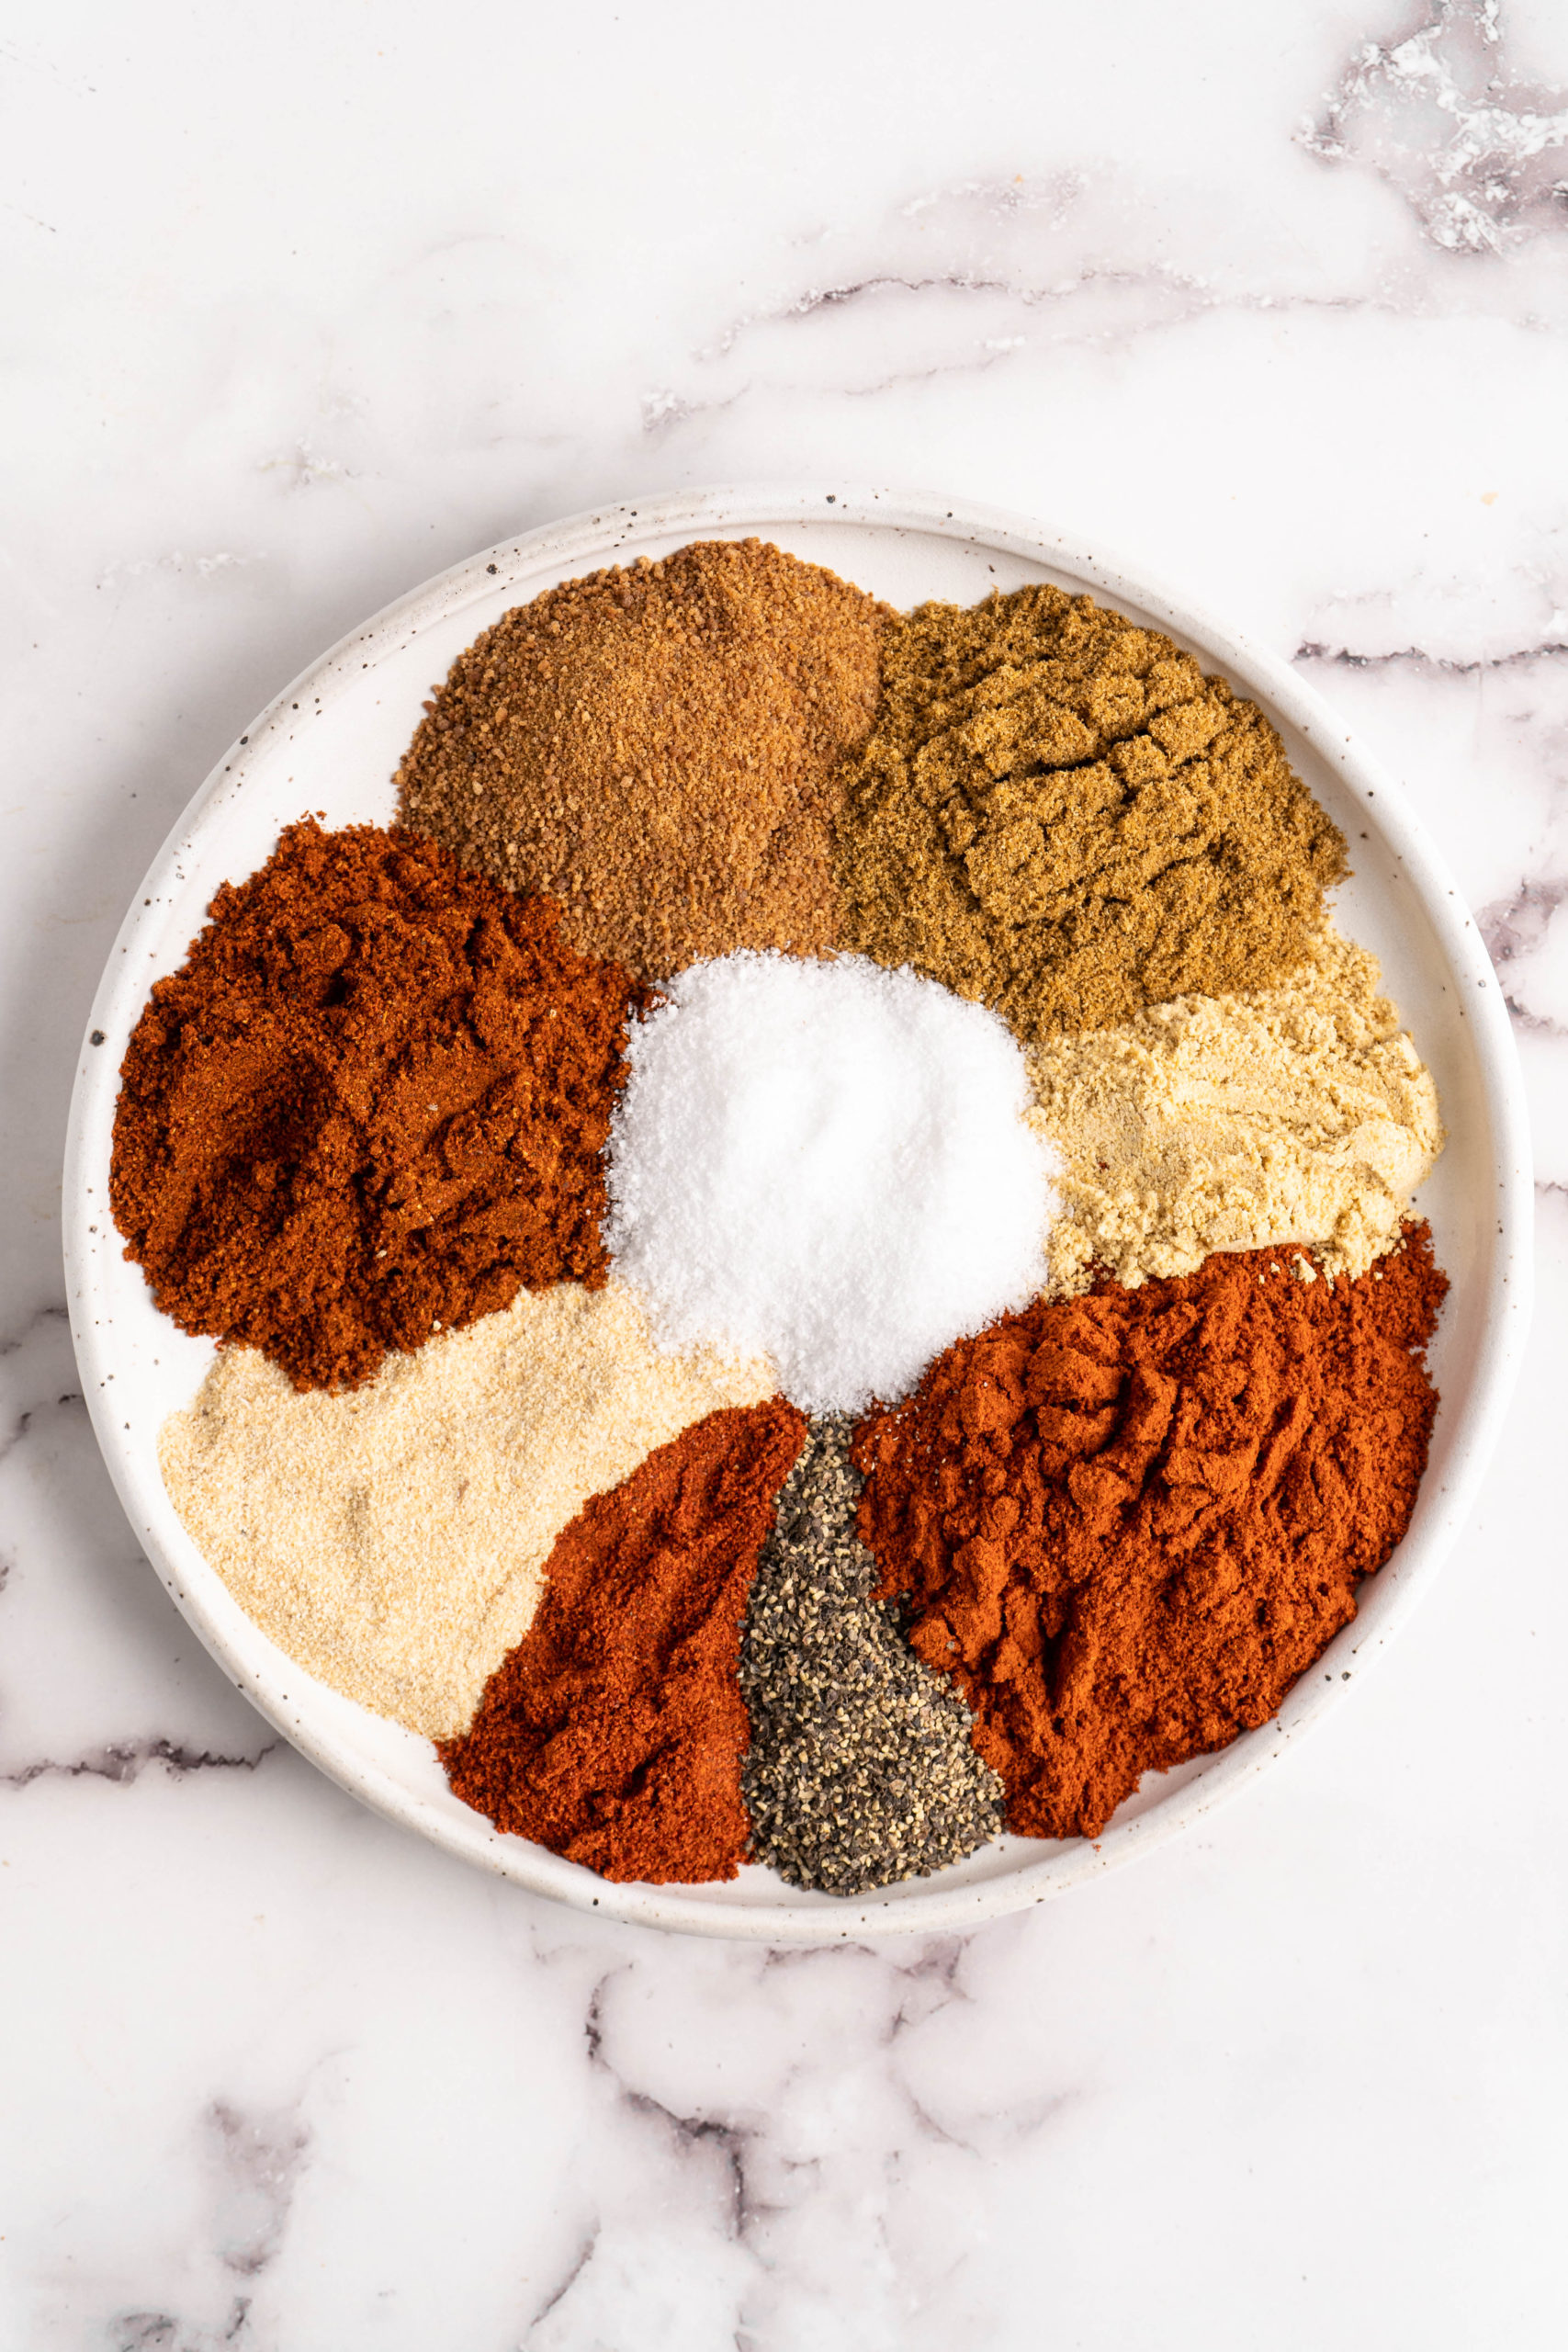 BBQ spice rub ingredients on plate